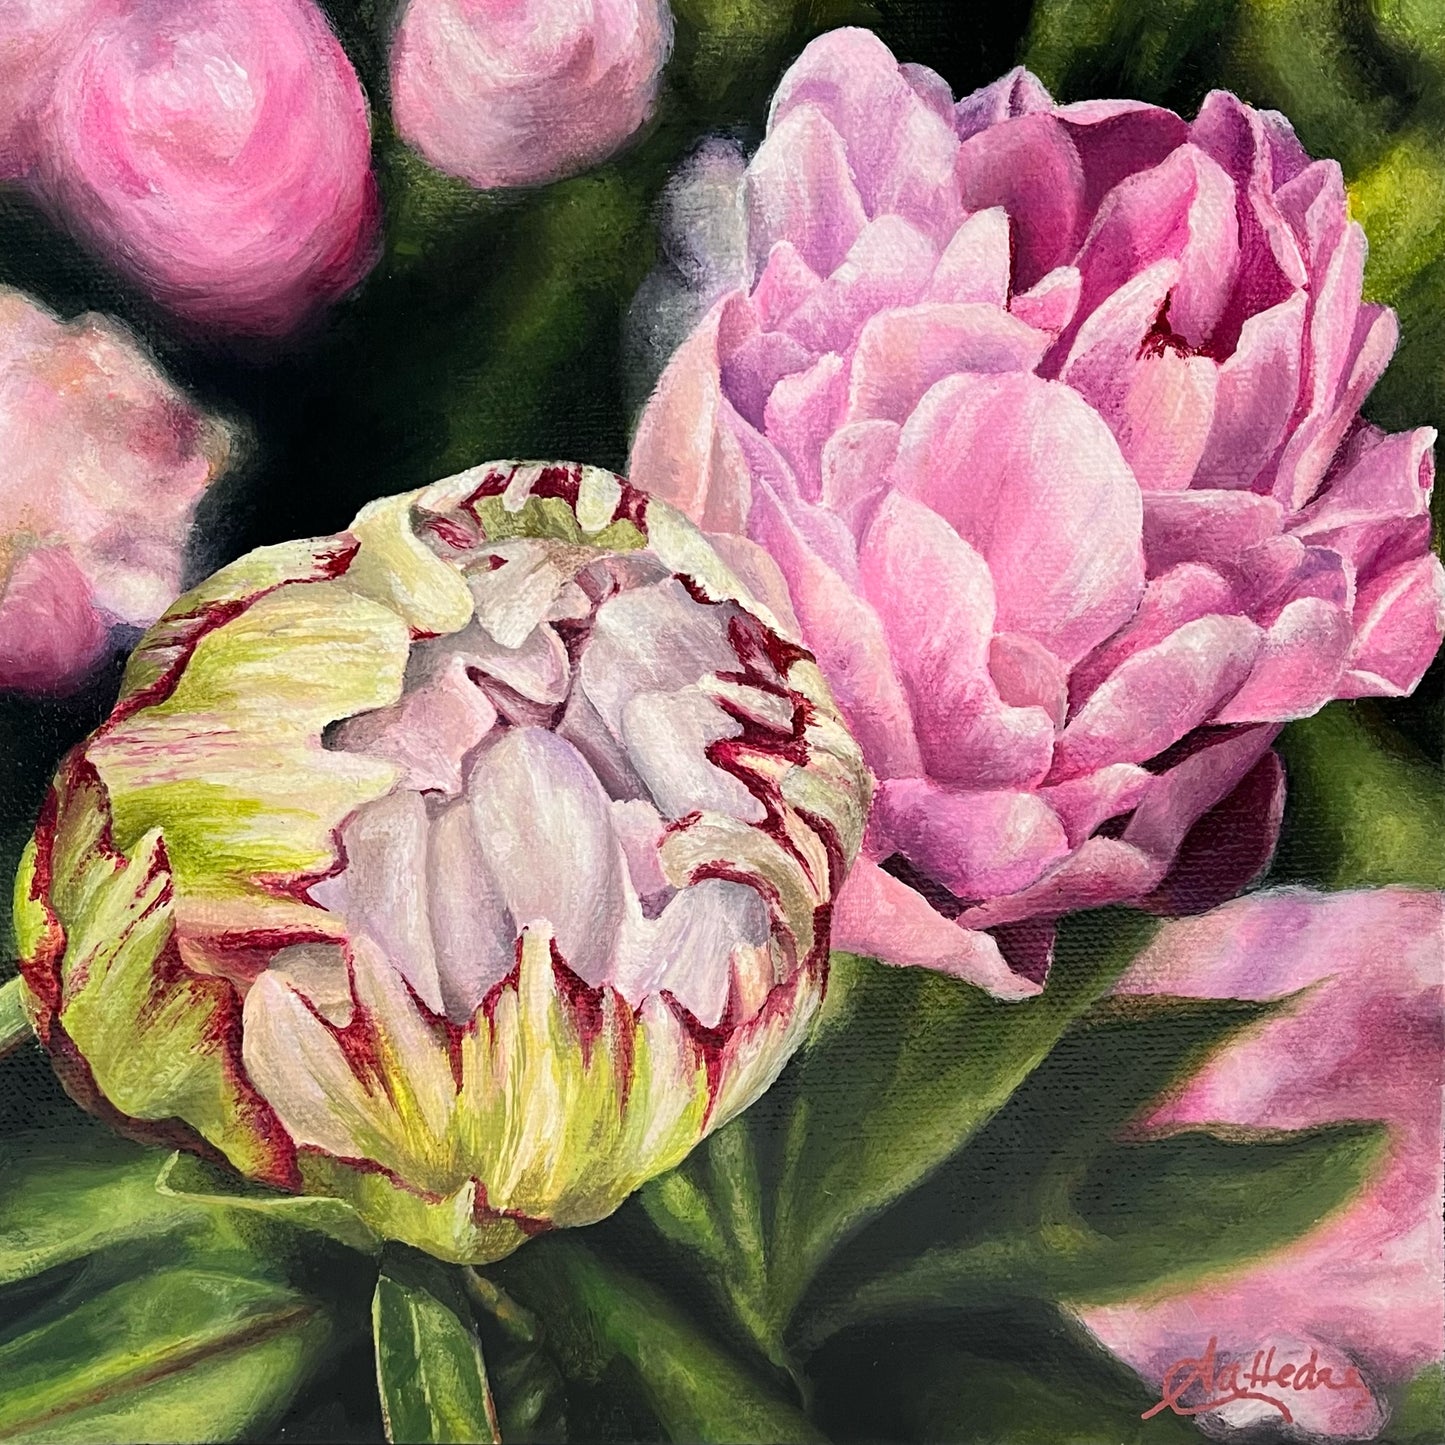 Buds In Bloom (Peony)